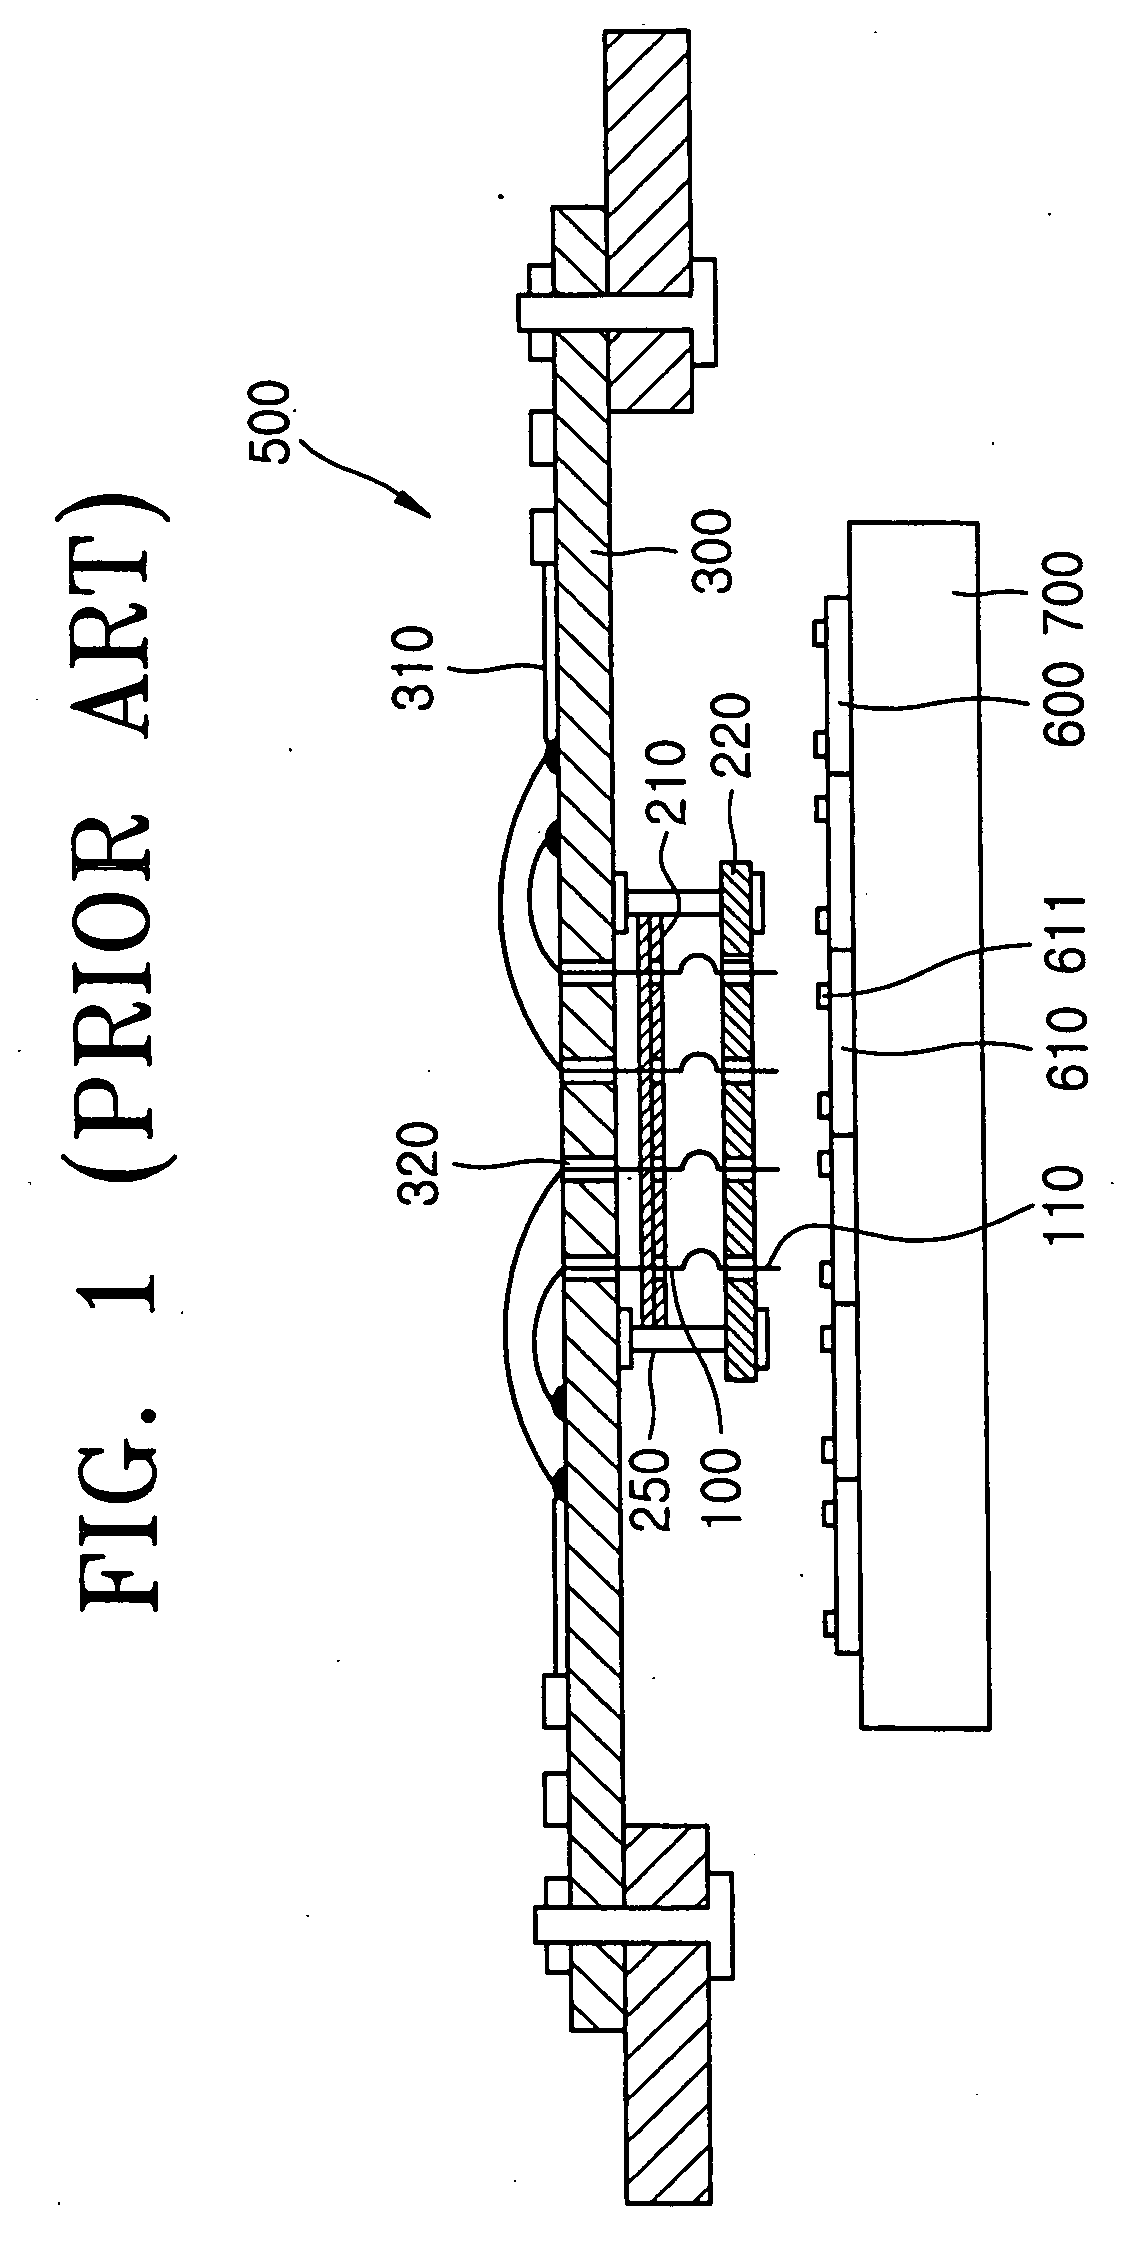 Donut-type parallel probe card and method of testing semiconductor wafer using same